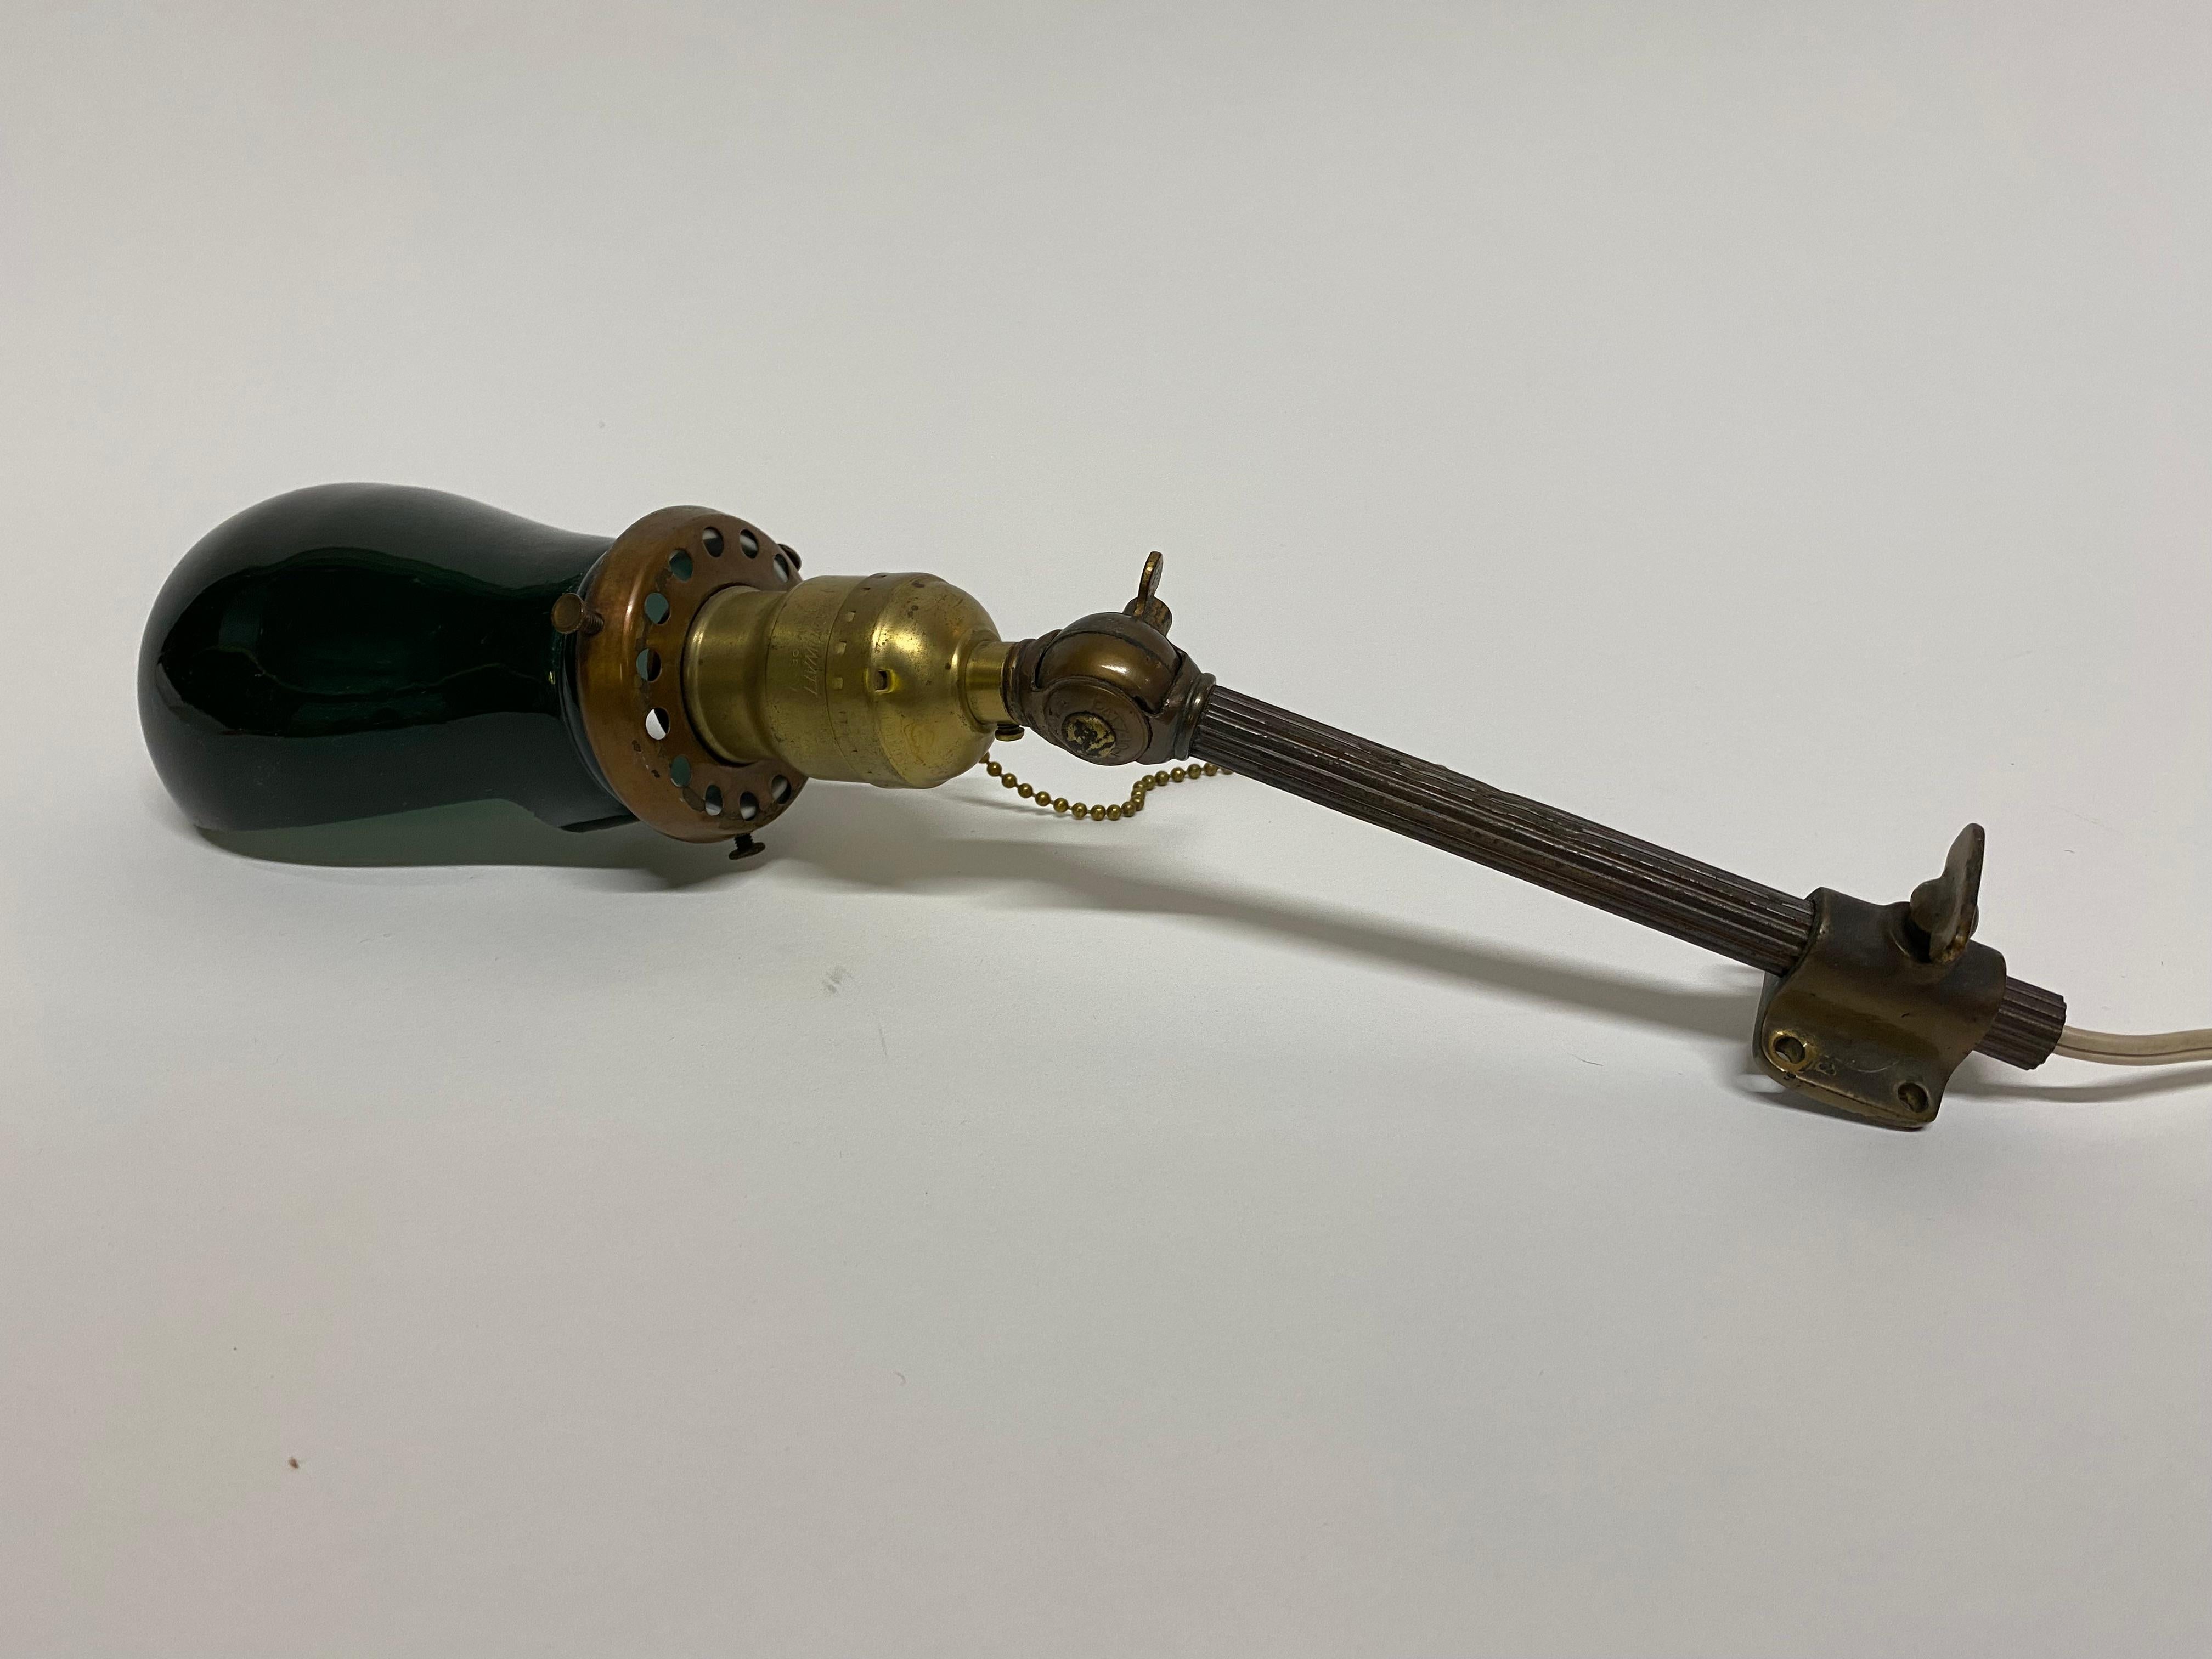 German articulated Emeralite Fostoria style work light, circa 1920. Needs to be fixed to a wall or wood molding. Green exterior and white interior glass shade. Adjustable height and extension fluted brass arm. The shade is acid stamped, Germany.